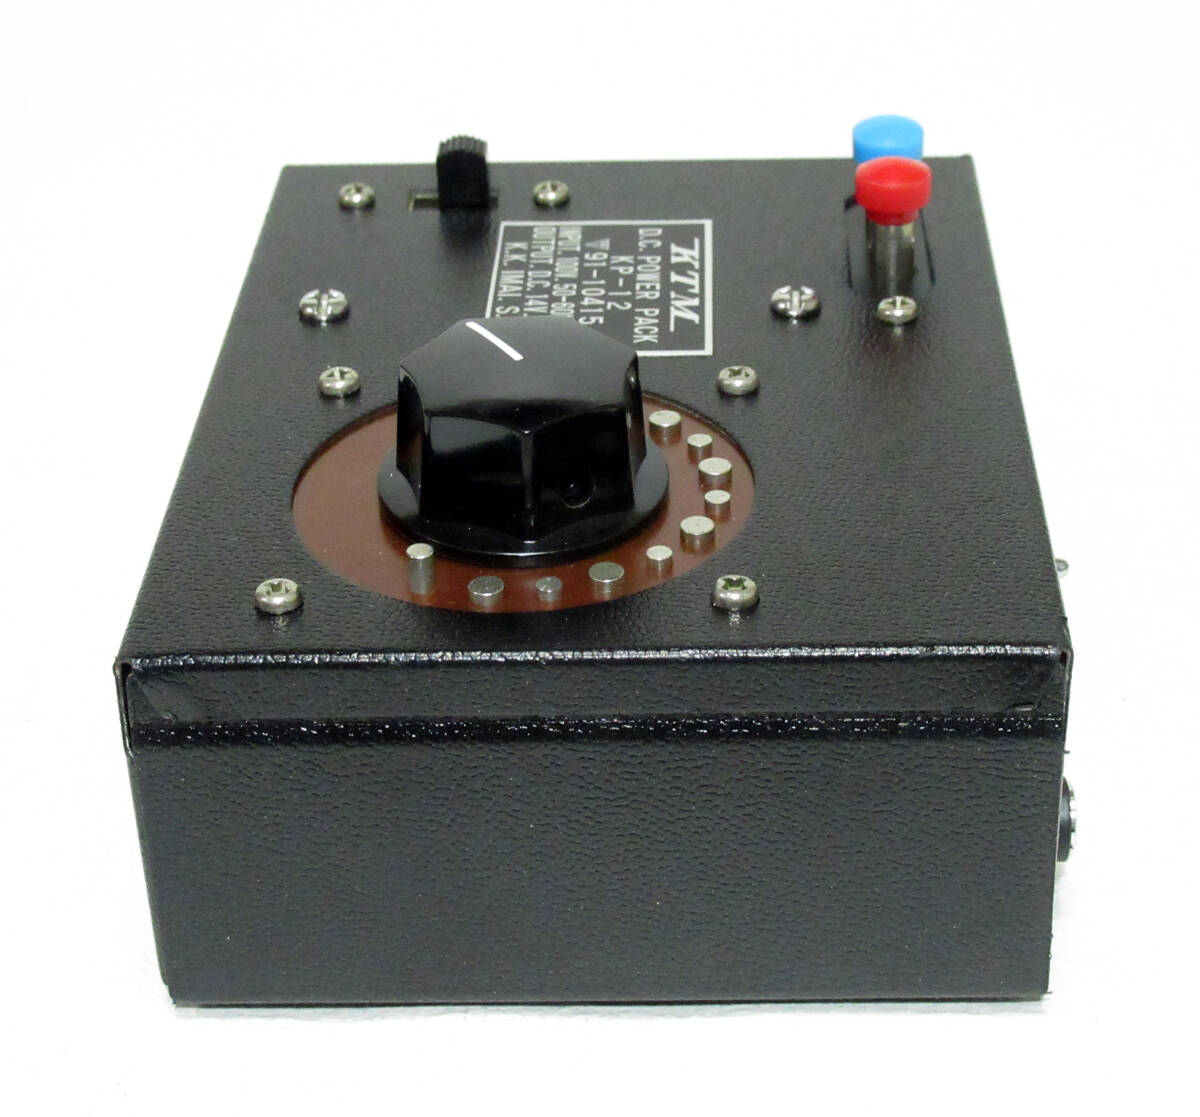  high-powered PWM control 12V 5Aka loading KTM KP-12 power pack modified switching system power pack 